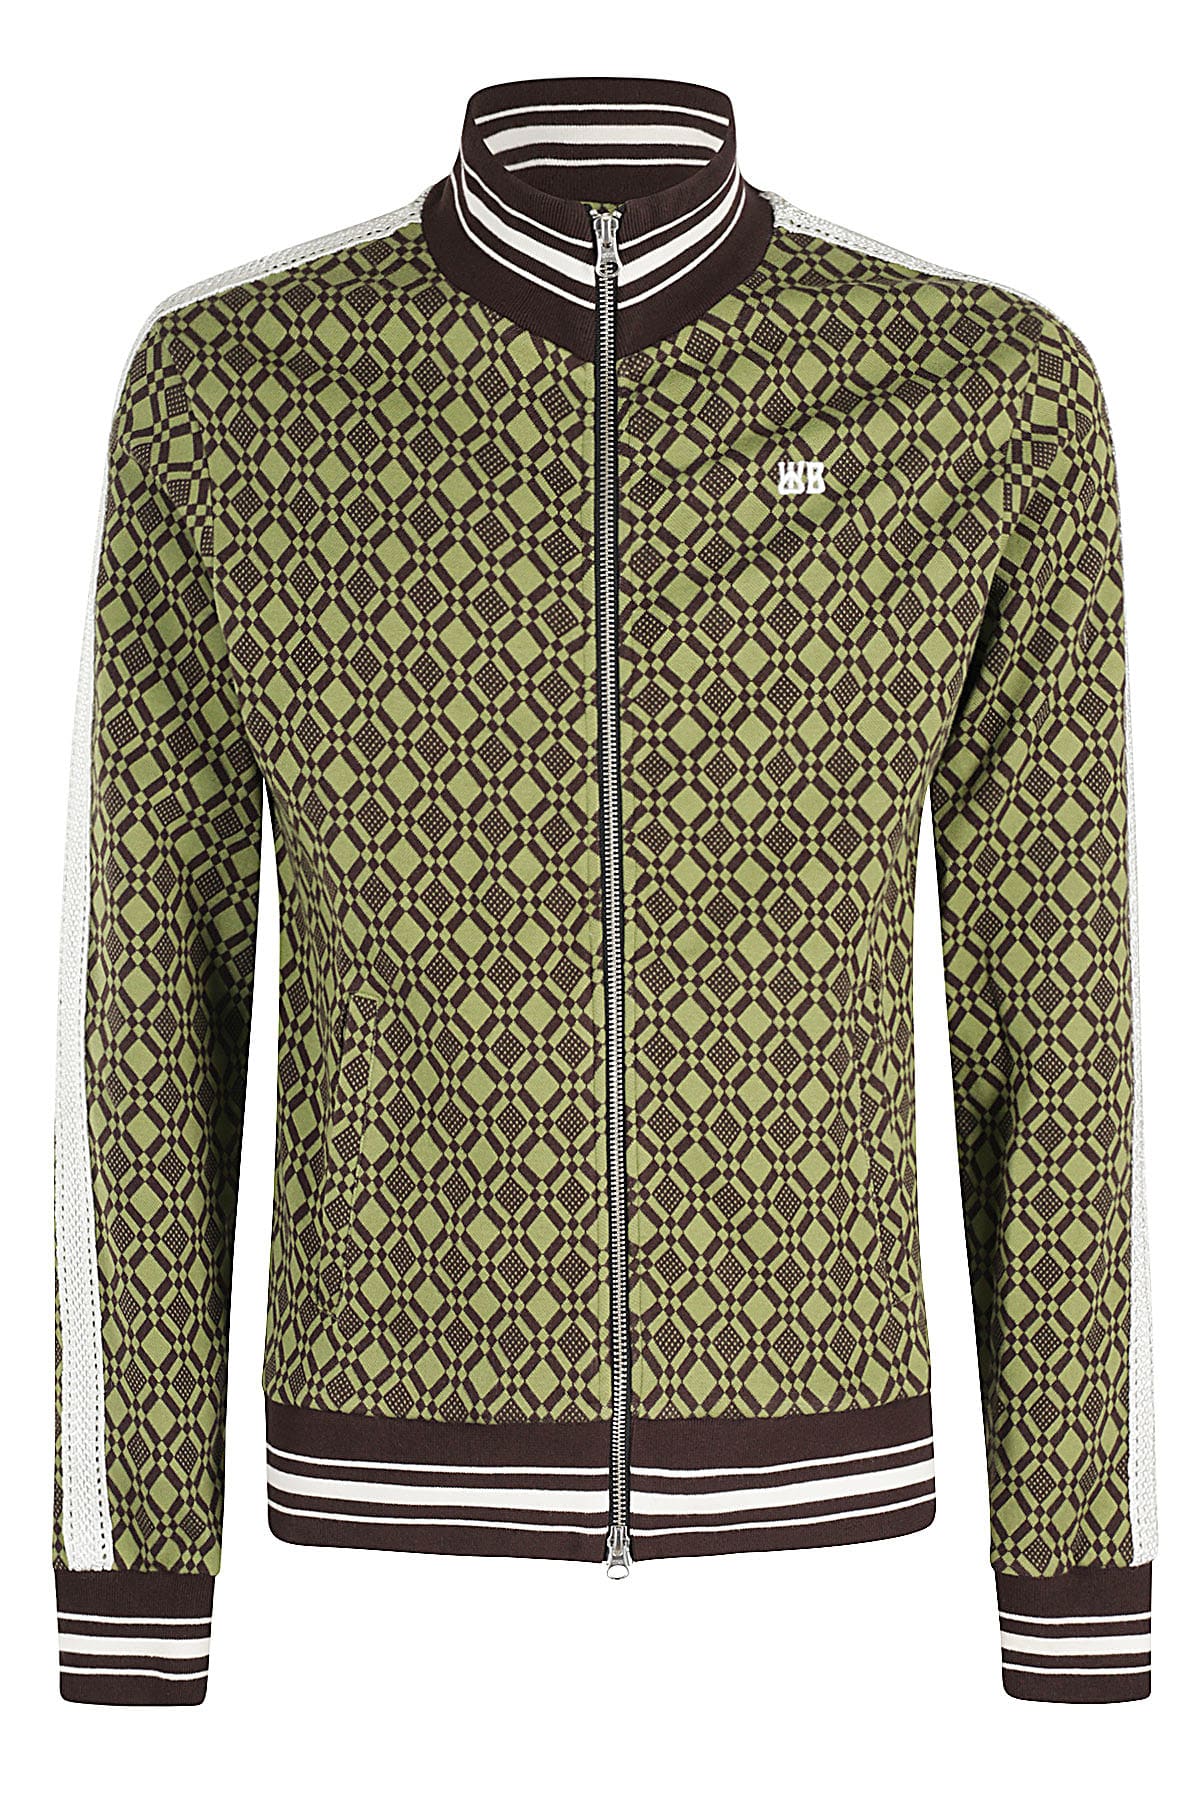 Shop Wales Bonner Power Track Top In Olive And Dark Brown